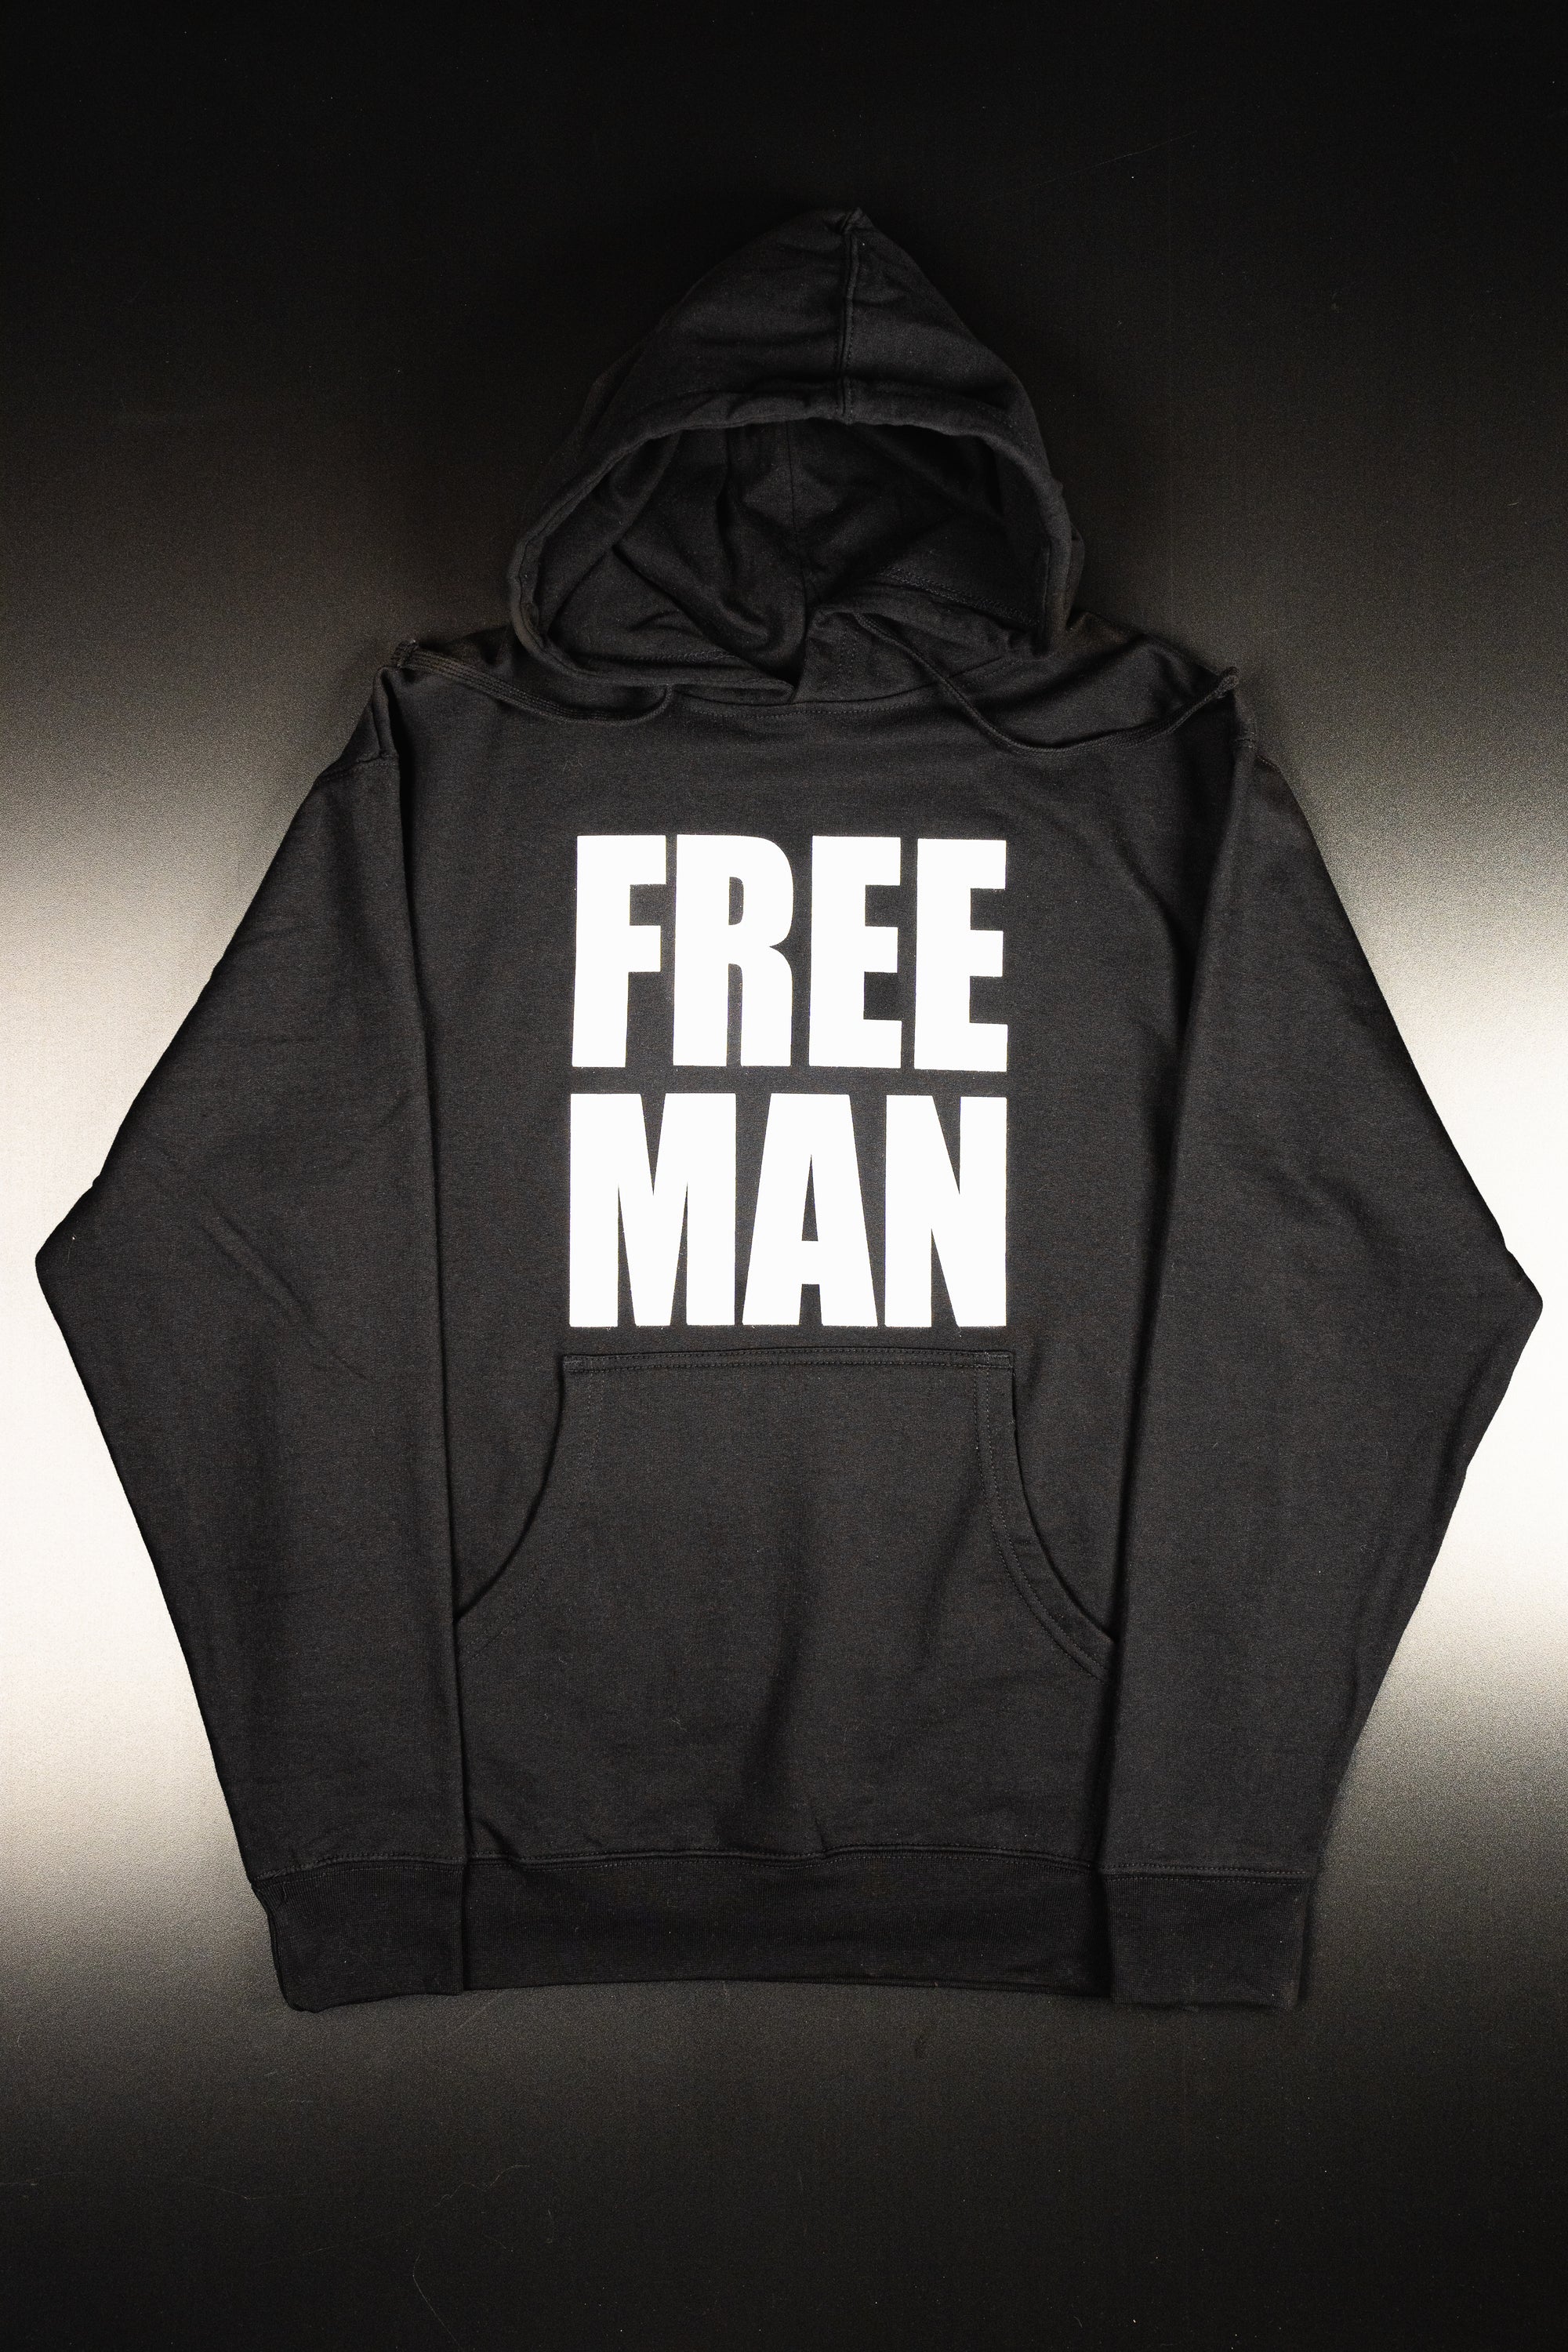 Lions Not Sheep "Free Man" Unisex Pullover Hoodie - Lions Not Sheep ®